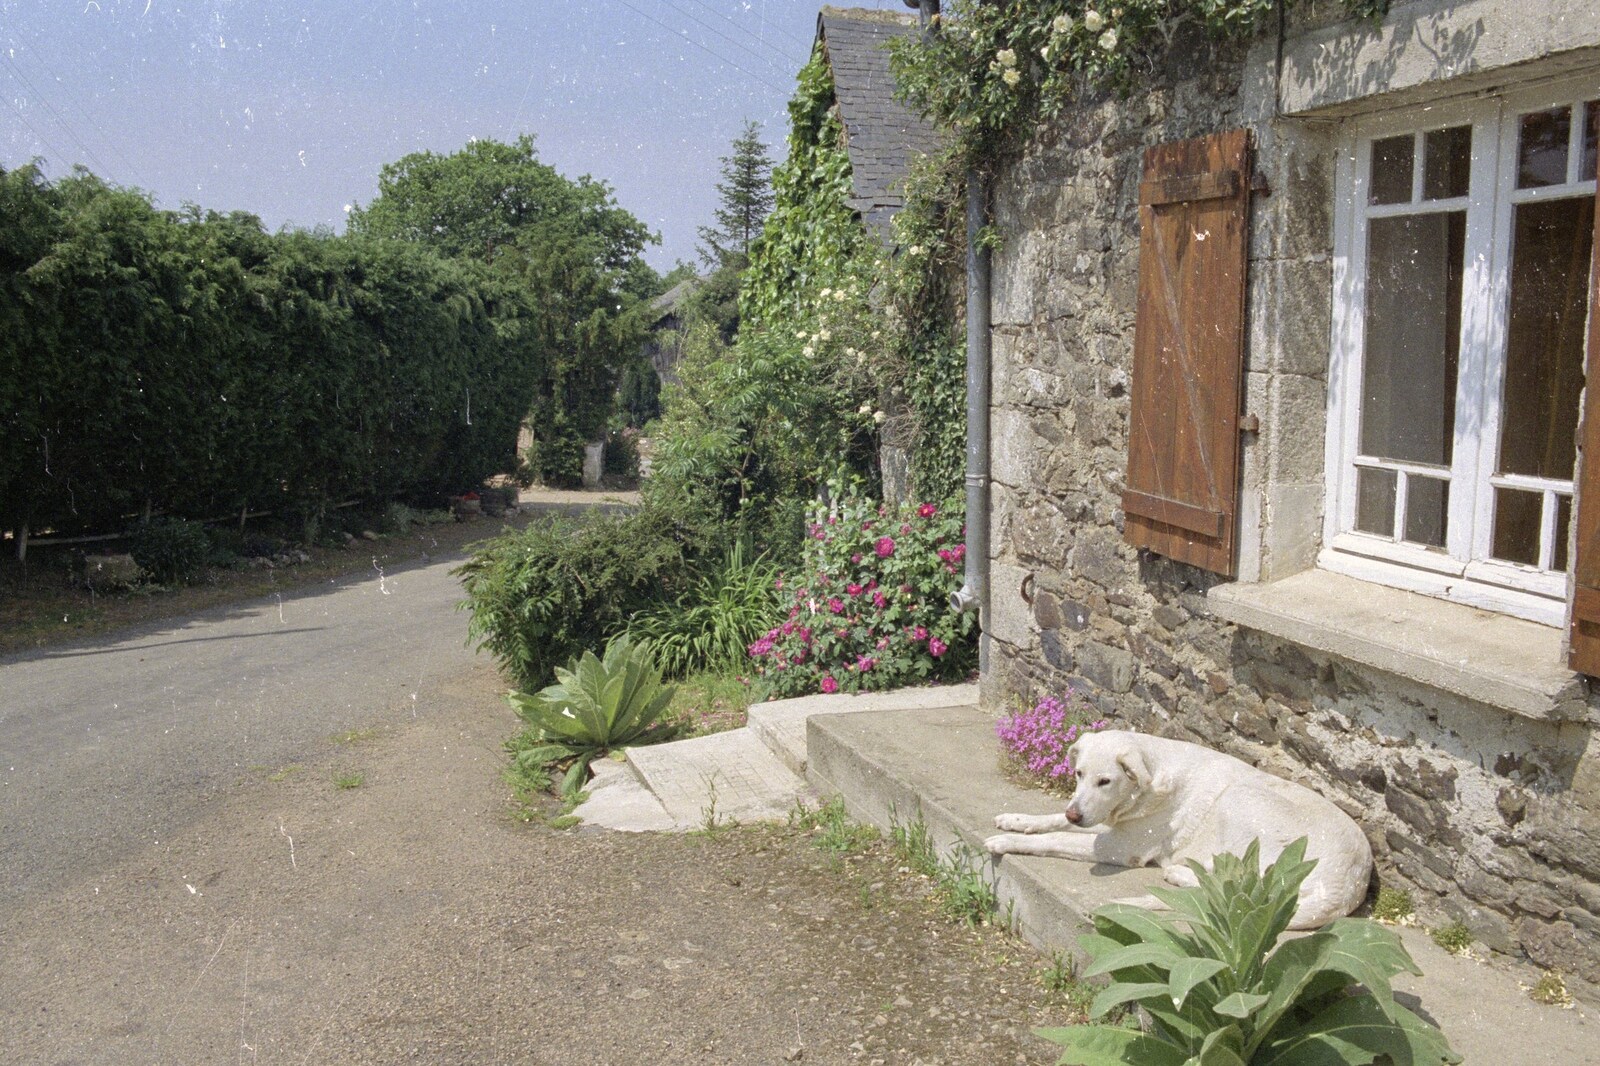 A Trip To Huelgoat, Brittany, France - 11th June 1990: A view down the lane